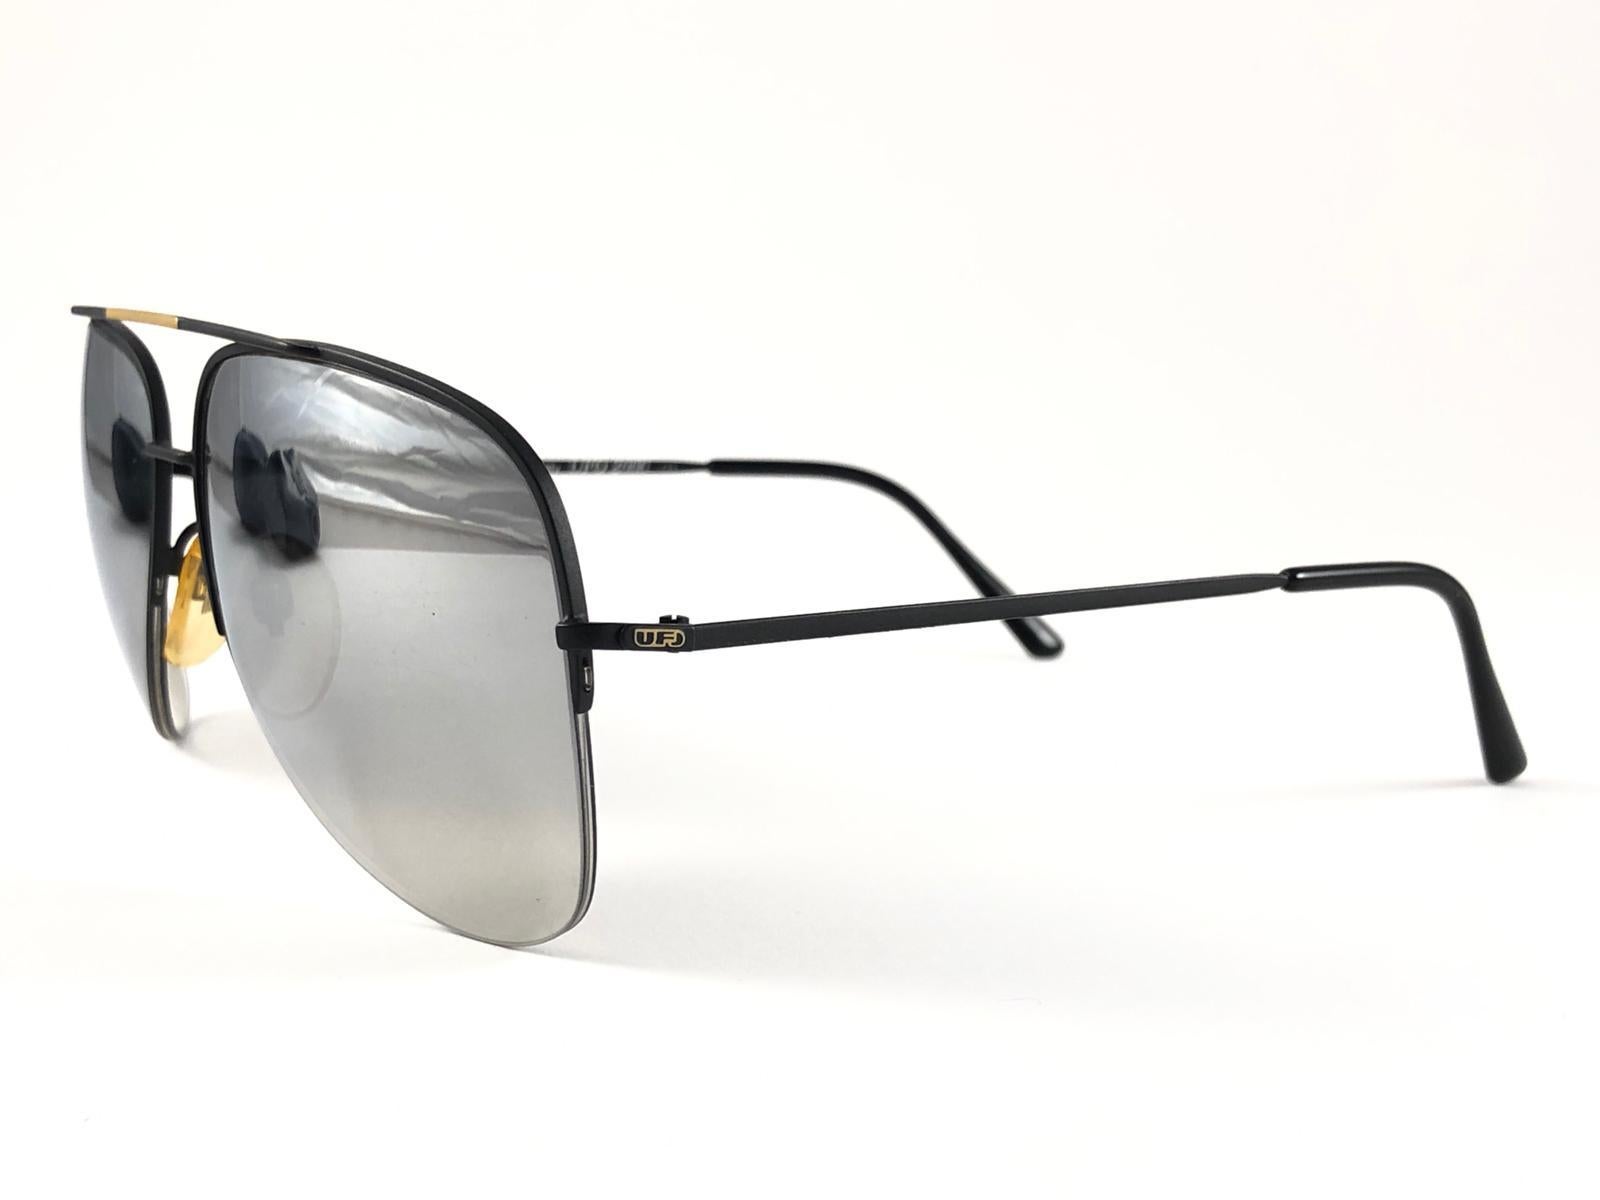 New Vintage Safilo, a balanced combination of Italian craftsmanship, design, functionality and striking aesthetics, this model showcases a Black Mate Half Frame holding a spotless Mirrored lenses.

New, never worn or displayed.
Made in